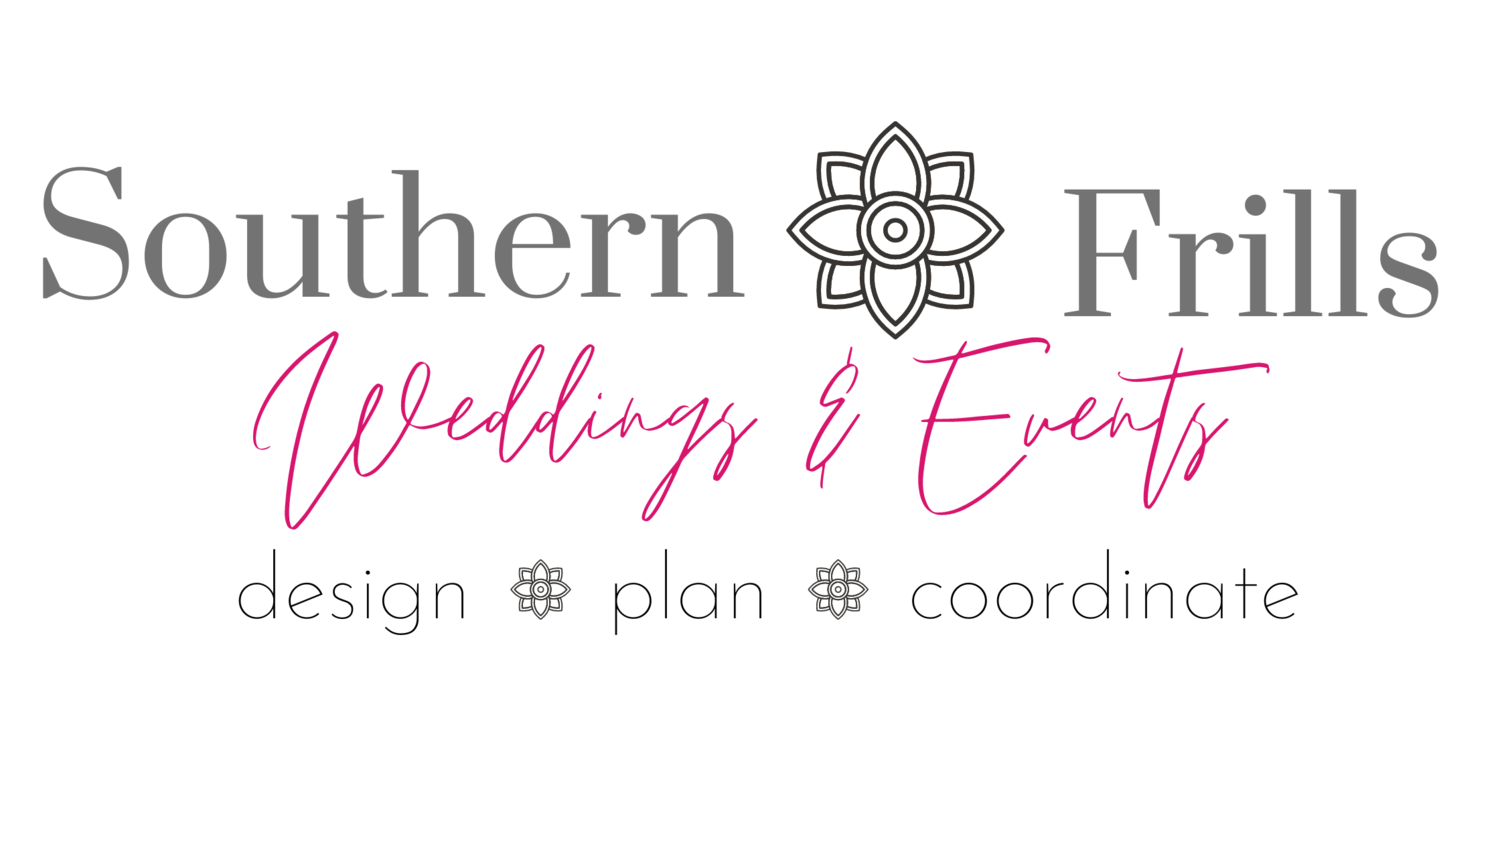 Southern Frills Weddings & Events Planner in Pensacola, Florida